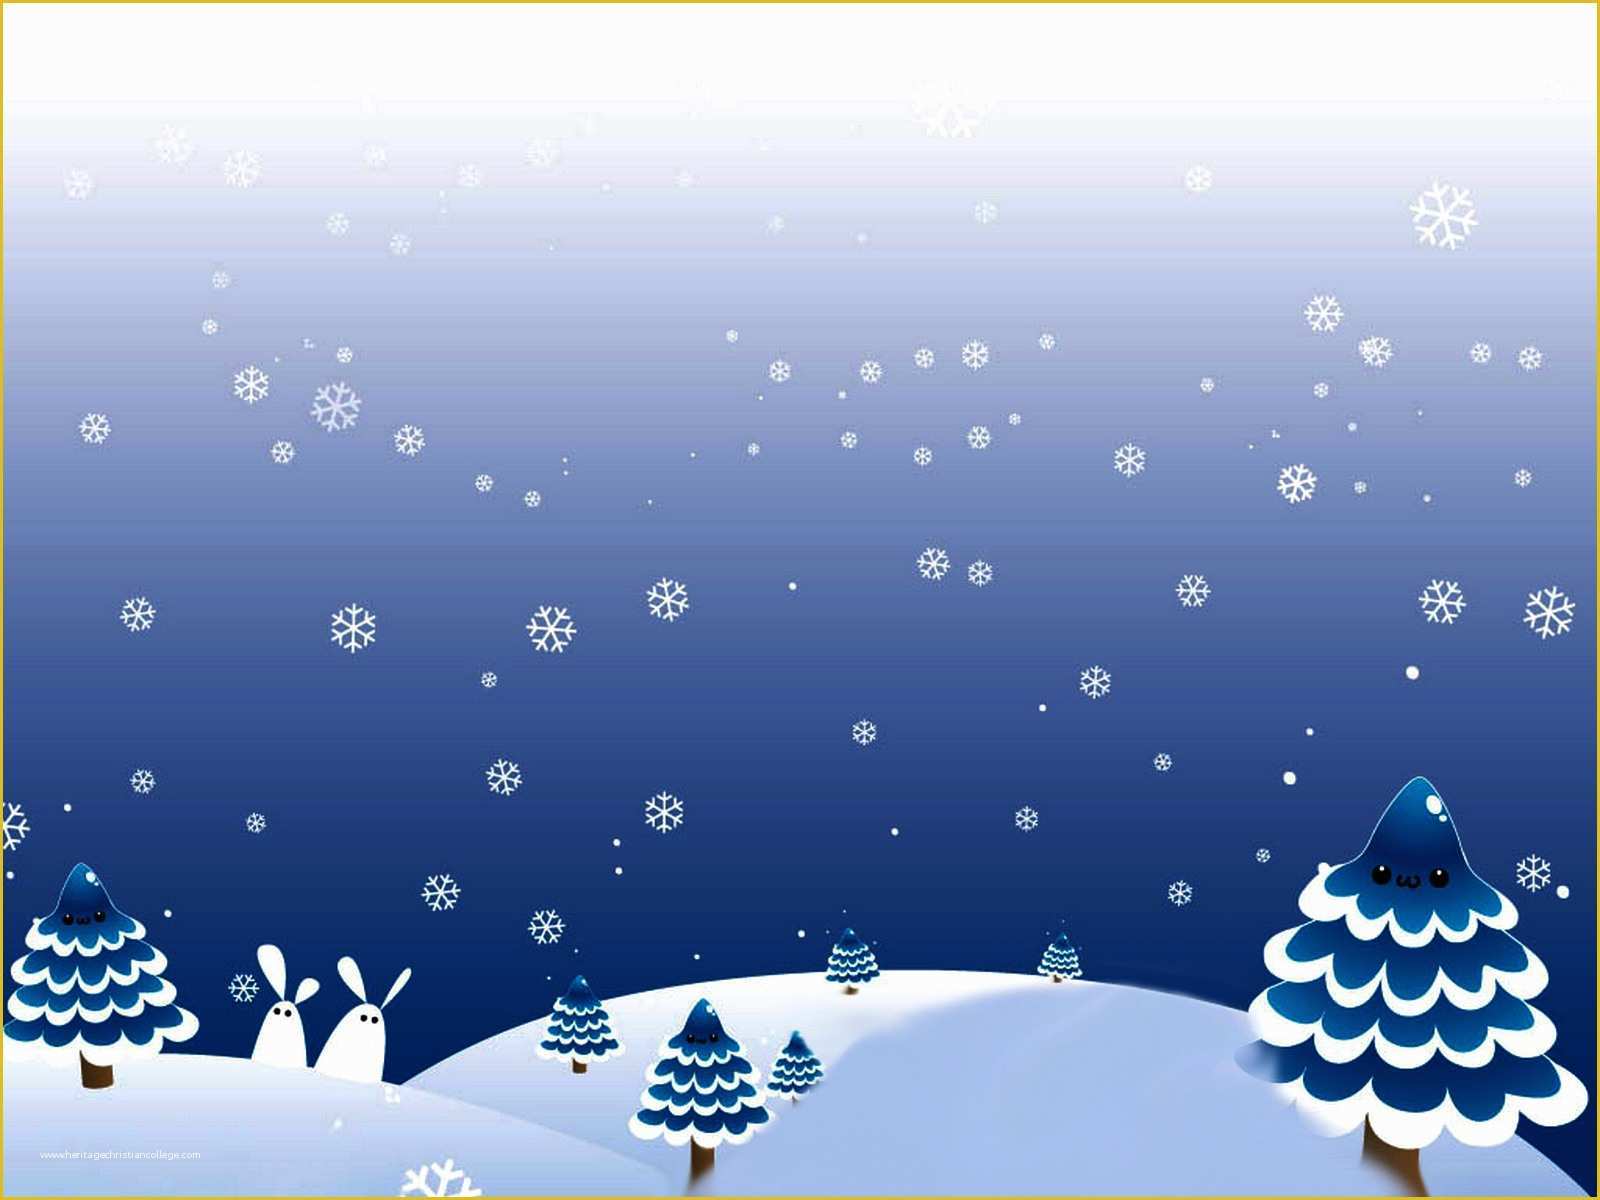 Free Christmas Powerpoint Templates Of Christmas Winter Backgrounds Wallpapersafari